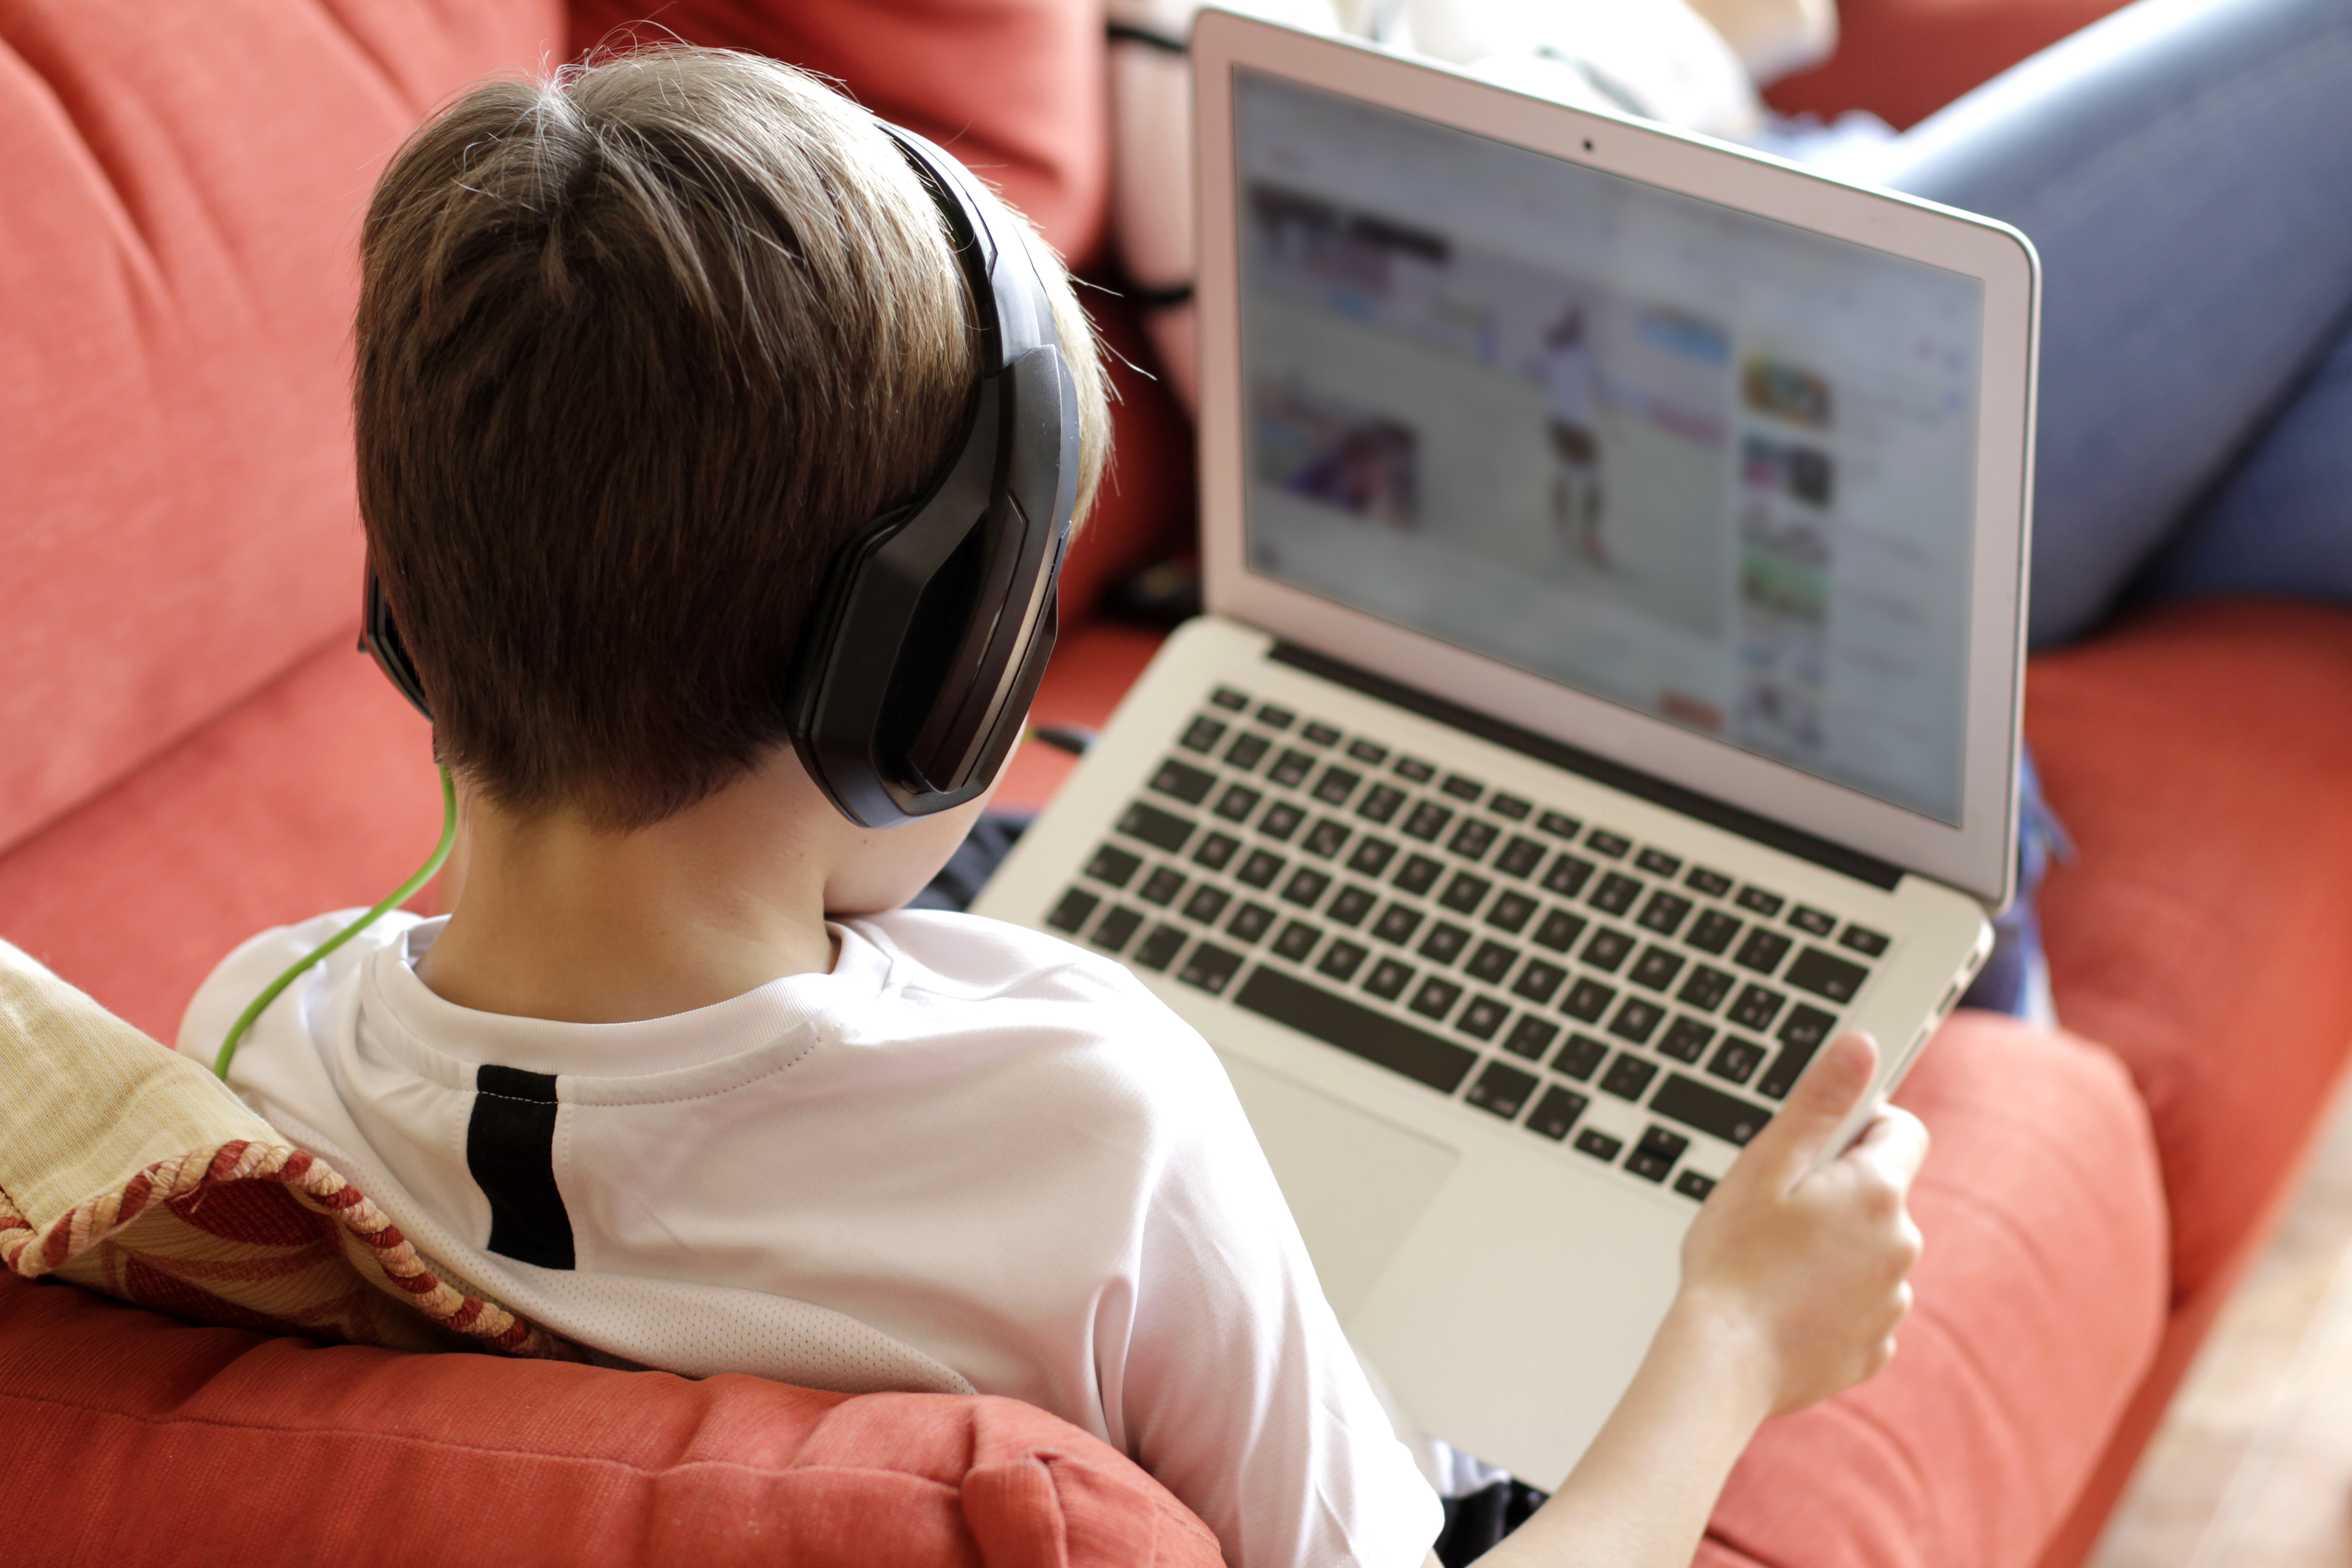 Boy with headphones using a laptop while sitting on a couch